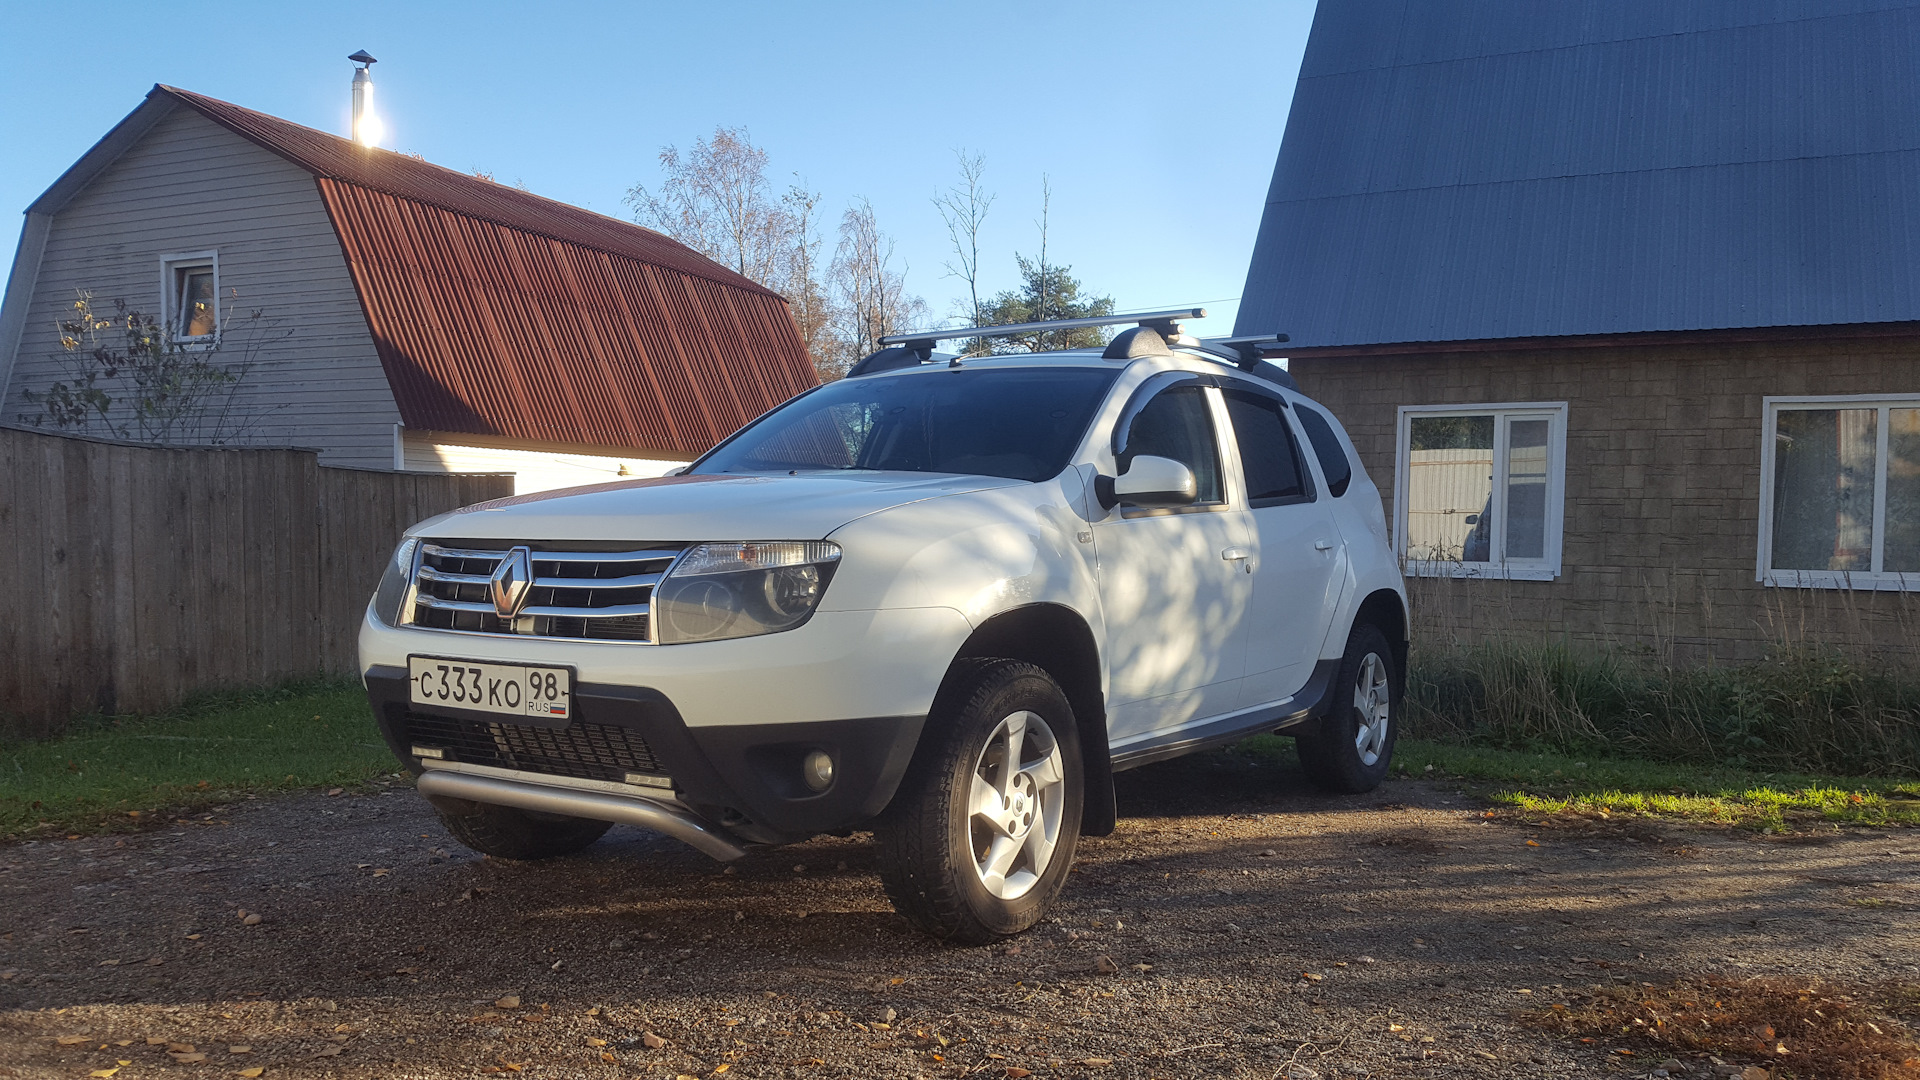 Renault Duster 2014 2.0. Рено Дастер белый. Рено Дастер 4х4. Рено дастер 2014 2.0 4х4